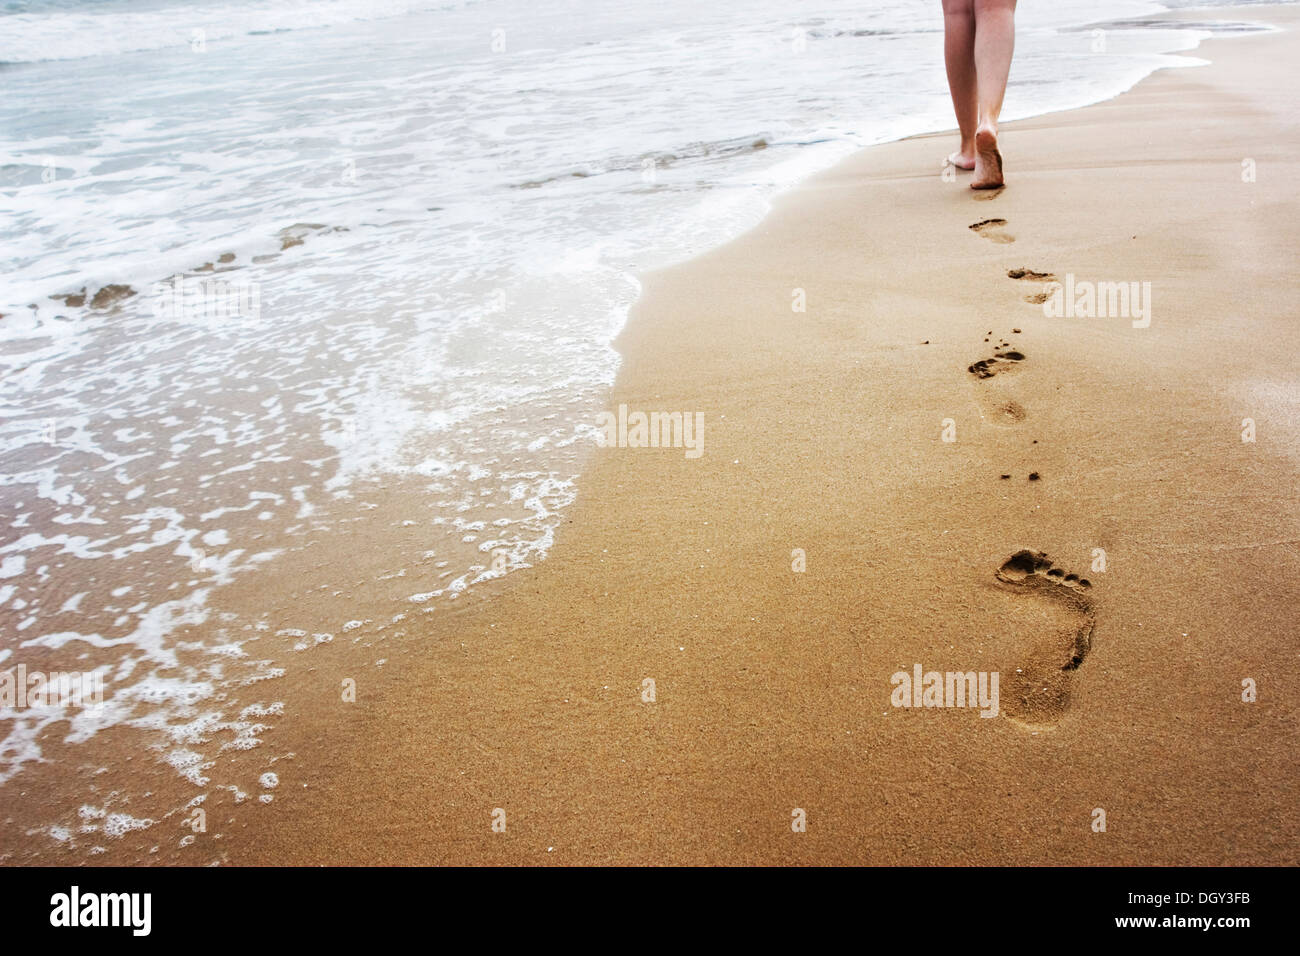 Footsteps prints left on sand in the island of Minorca, Spain Stock Photo